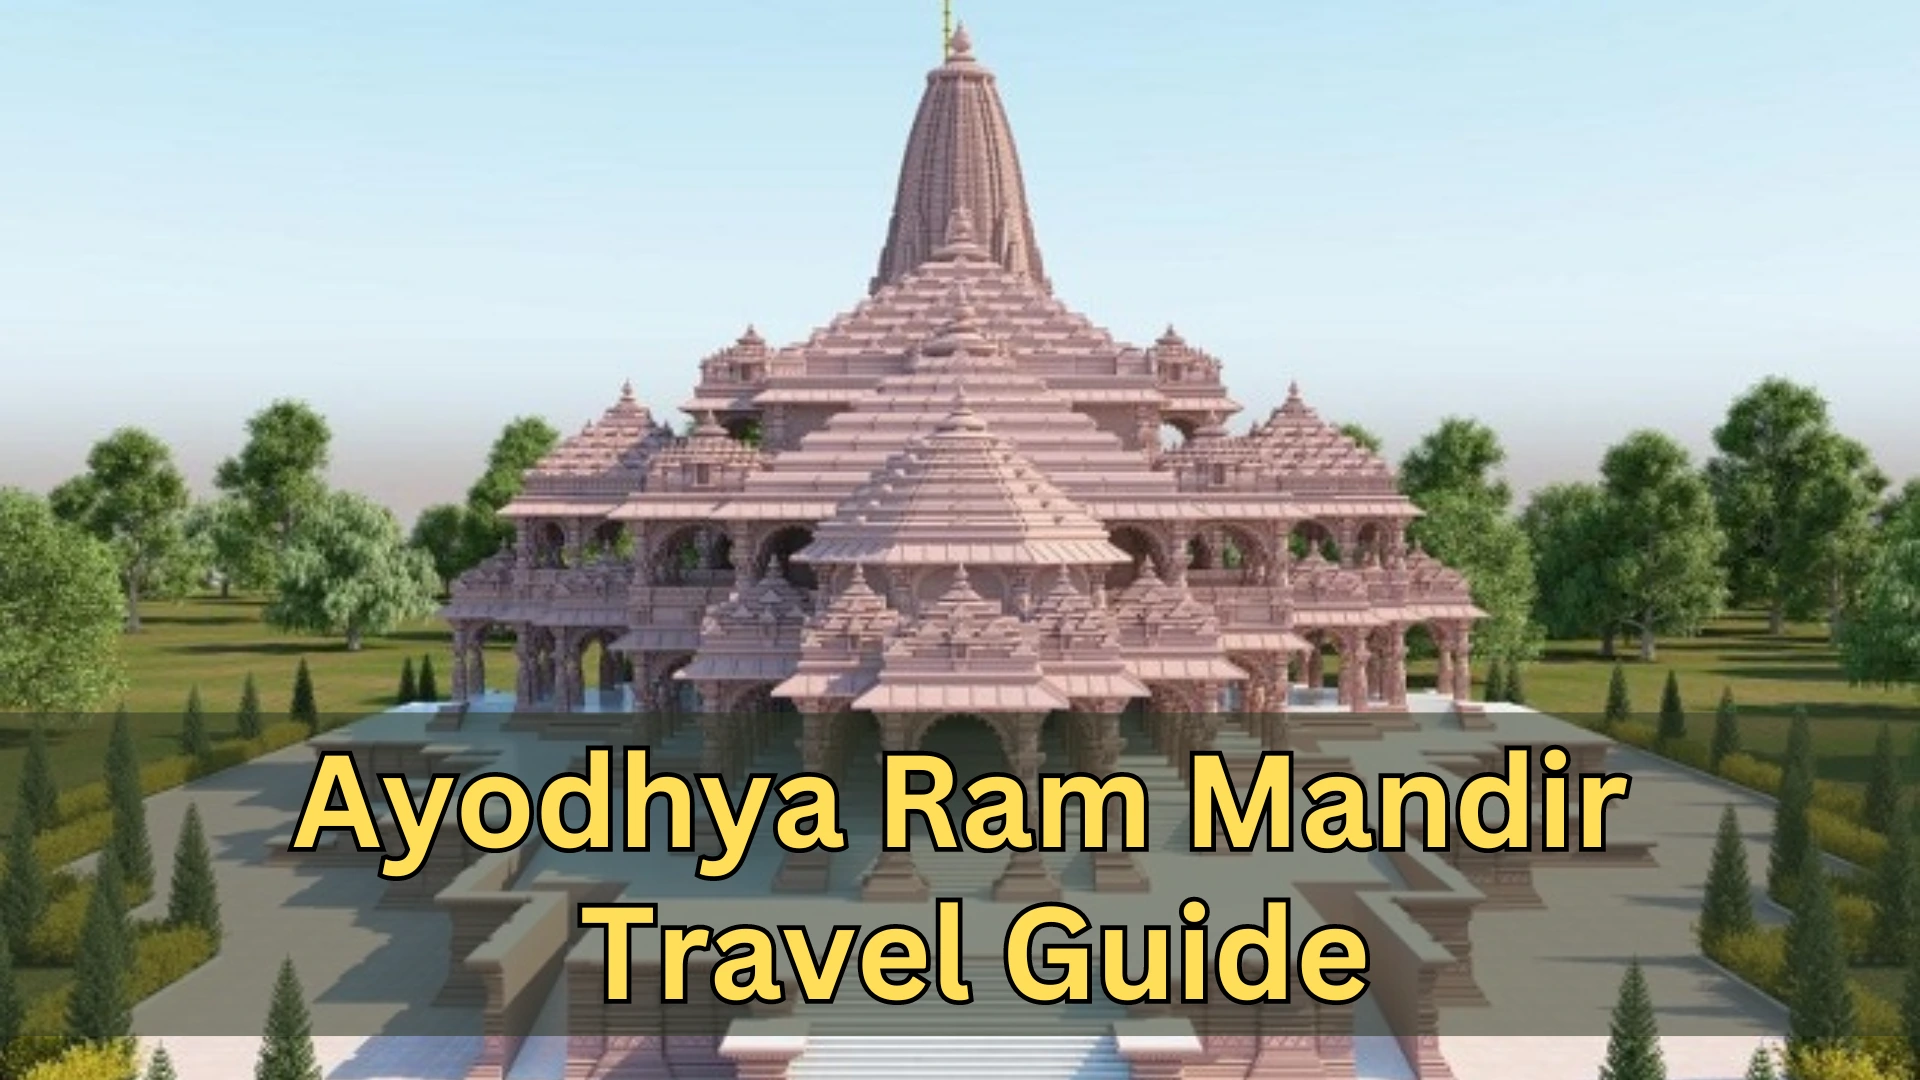 Ayodhya Ram Mandir Travel Guide: Temples, Places to Visit, and Tourism ...